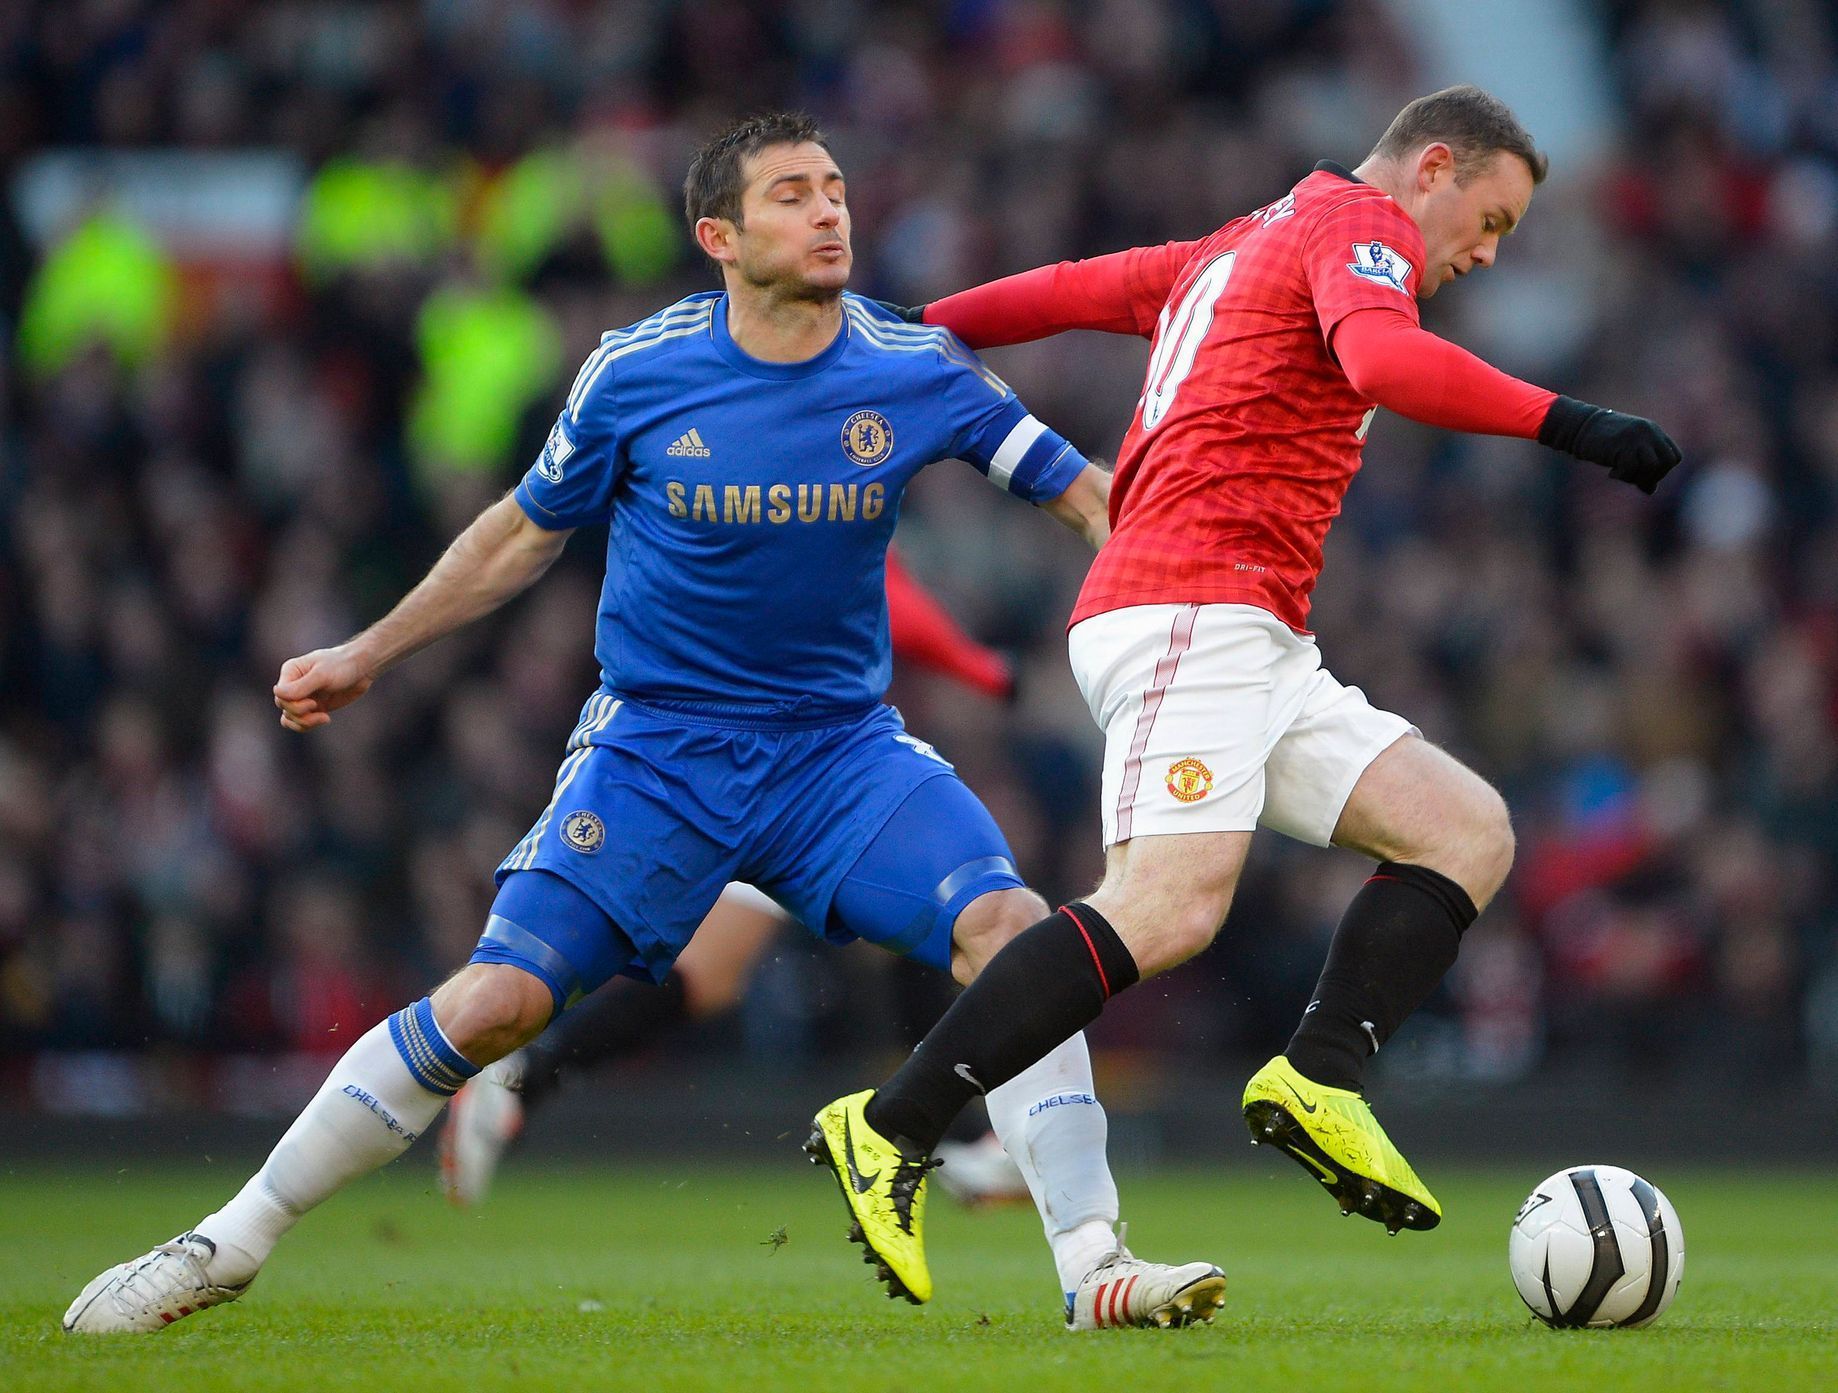 Manchester United - Chelsea (FA Cup)